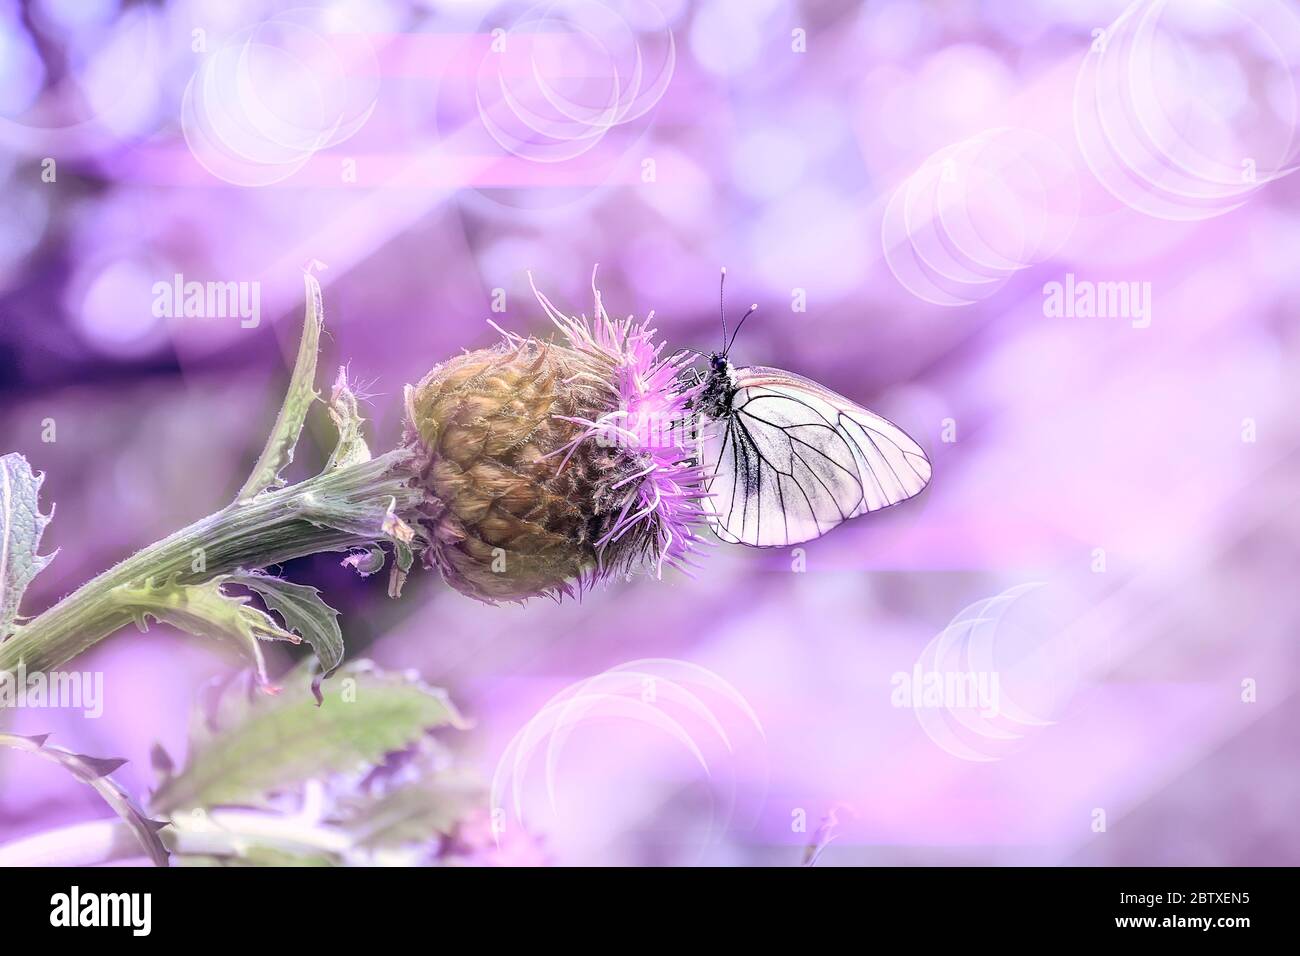 Pink summer morning on the meadow - delicate artistic image. Macro of white butterfly on purple Rhaponticum carthamoides flower - romantic toned sprin Stock Photo